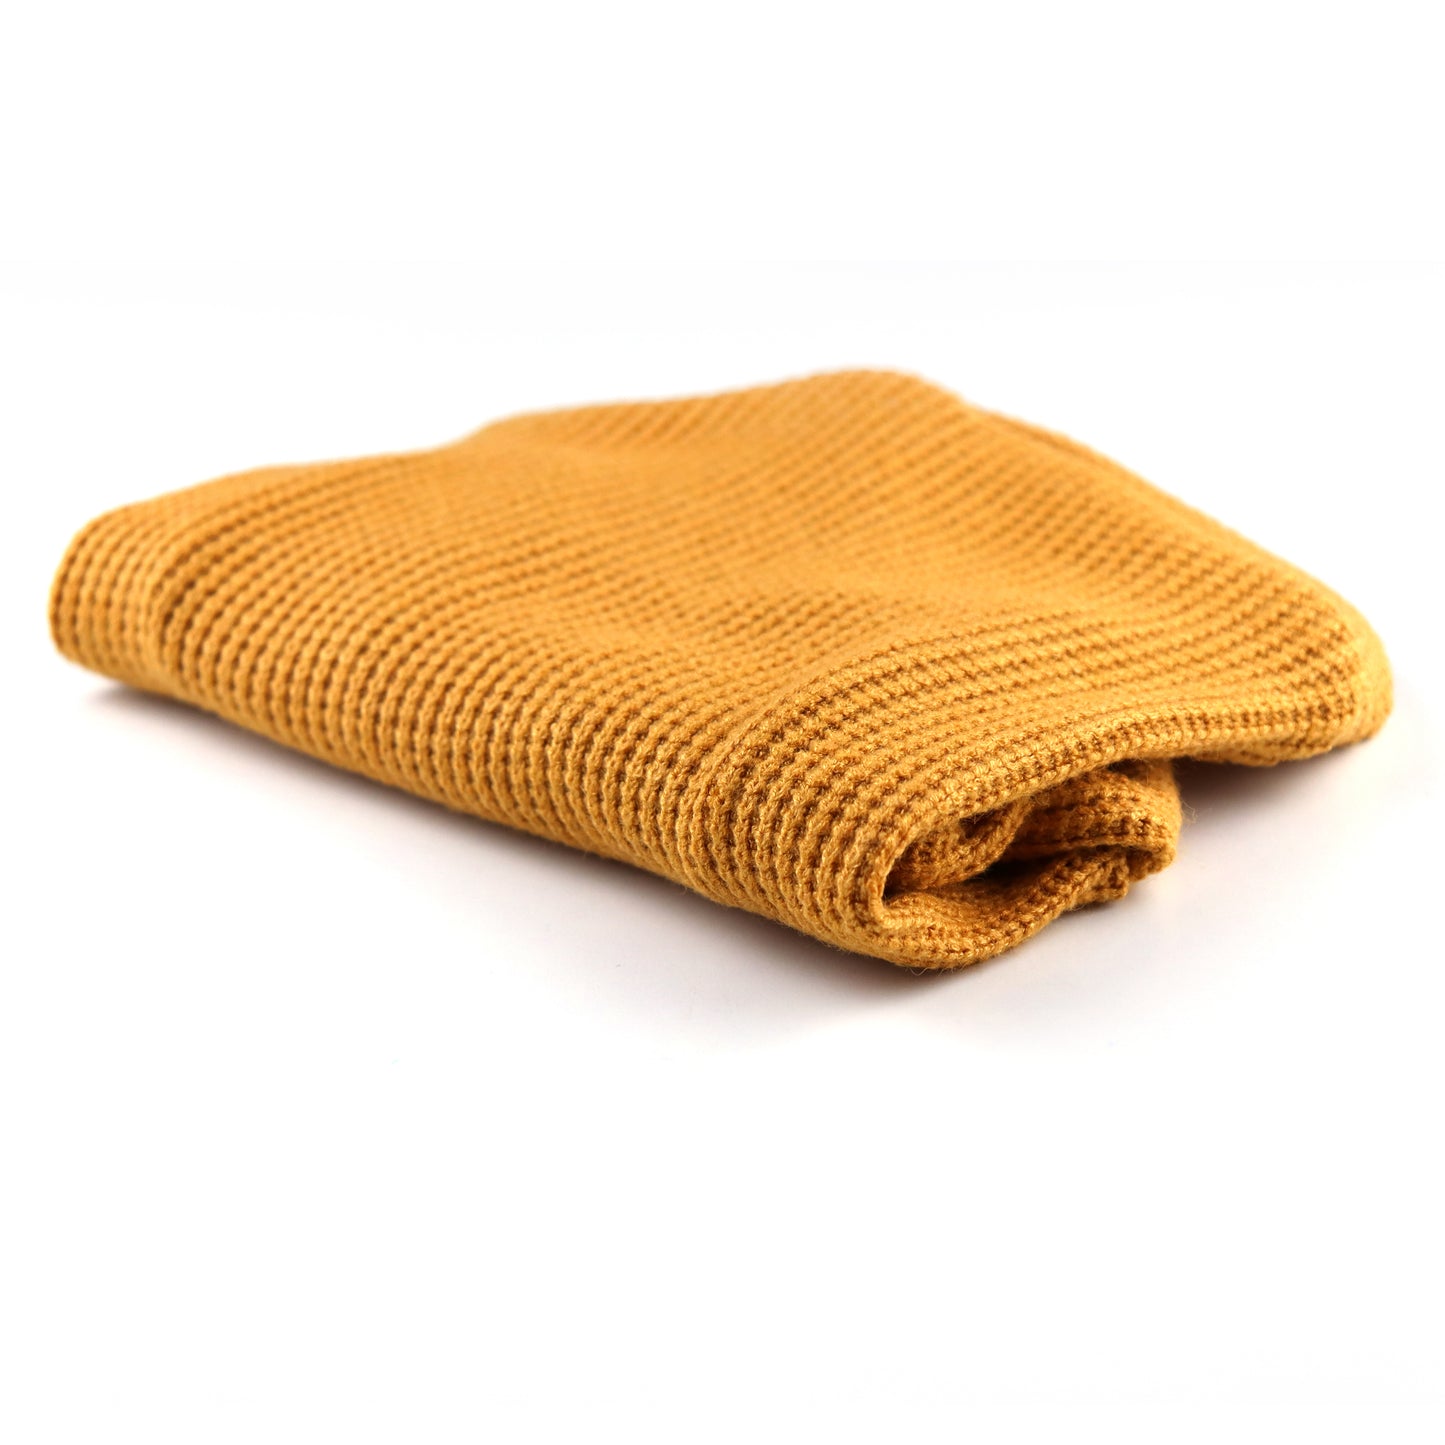 Yellow sweater for Cat. Slip-on for Sphynx, hairless cats and all cats breeds